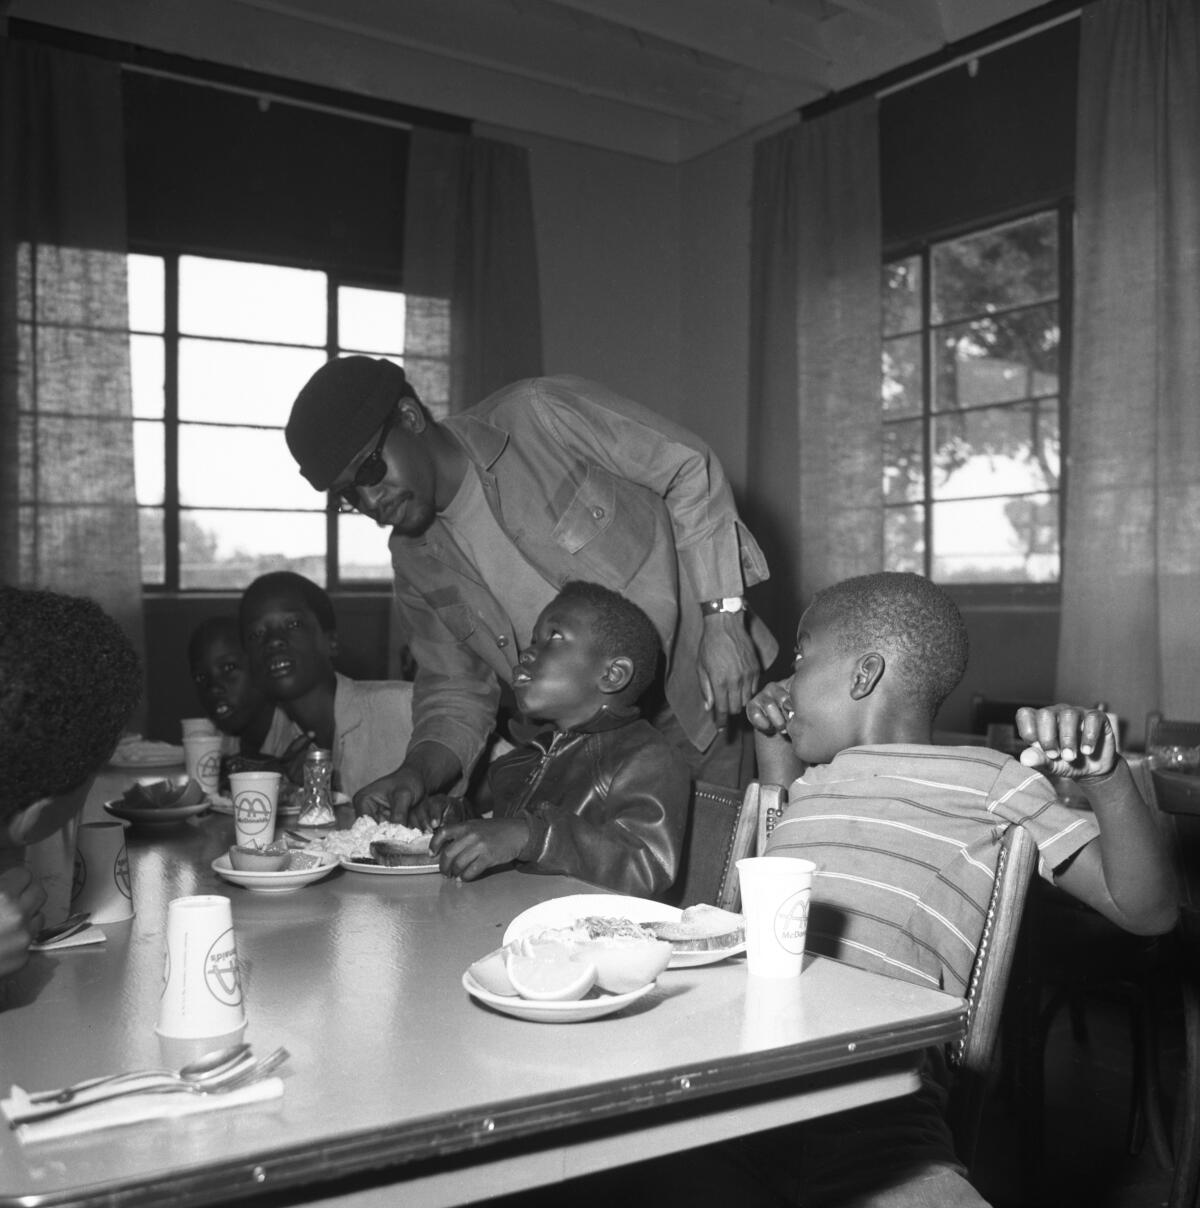 In 1969, a Black Panther in San Diego serves children as part of the party's free breakfast program